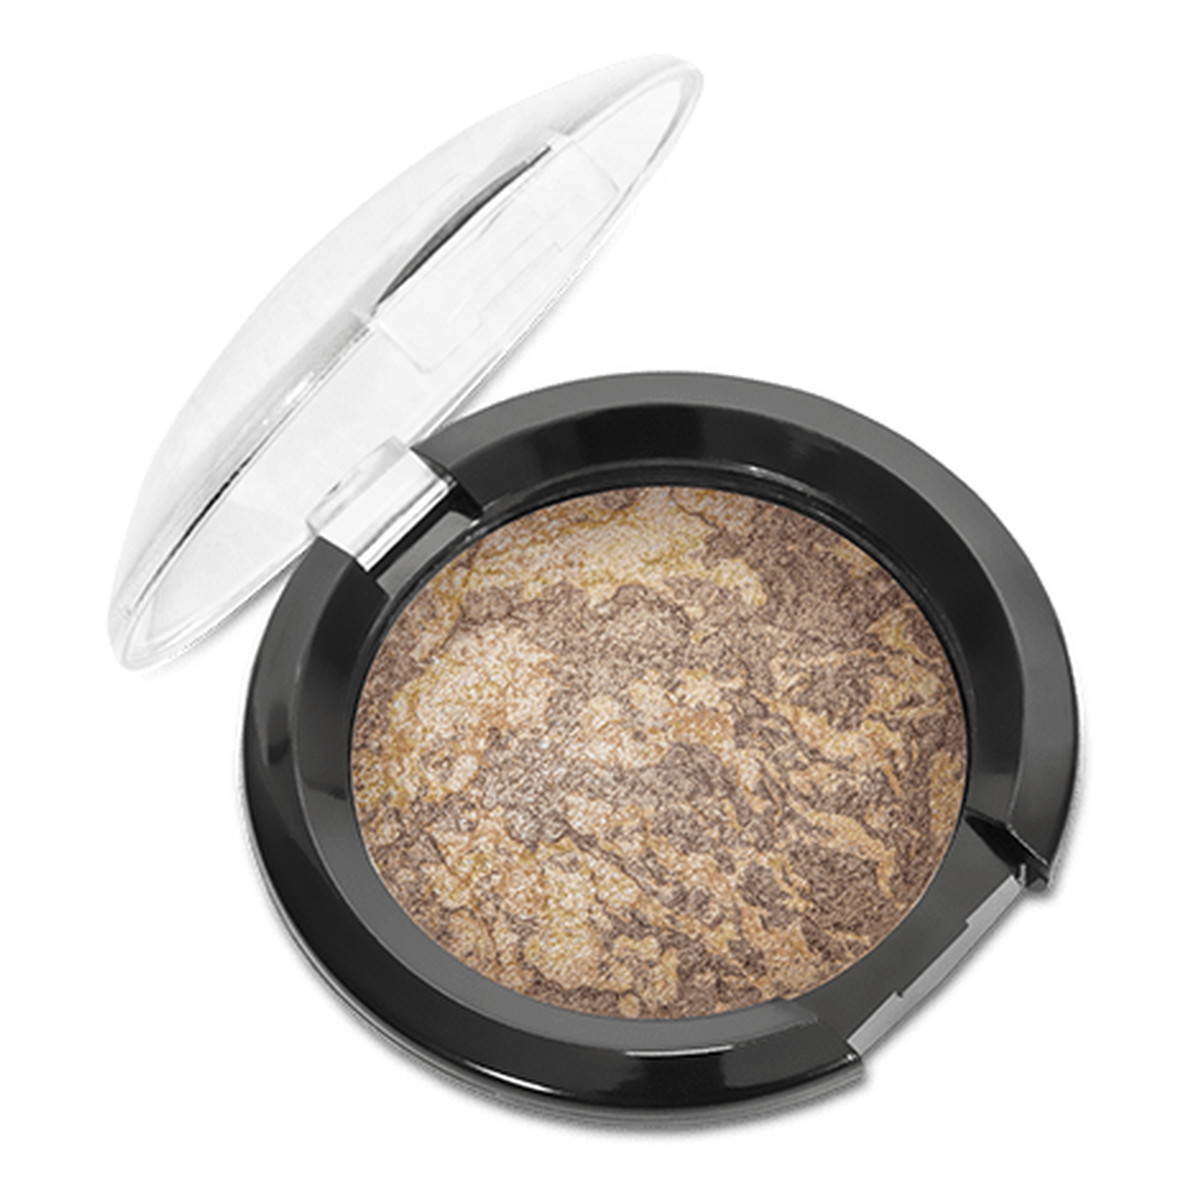 Affect MINERAL BAKED POWDER Mineralny Puder Wypiekany (T-0006)